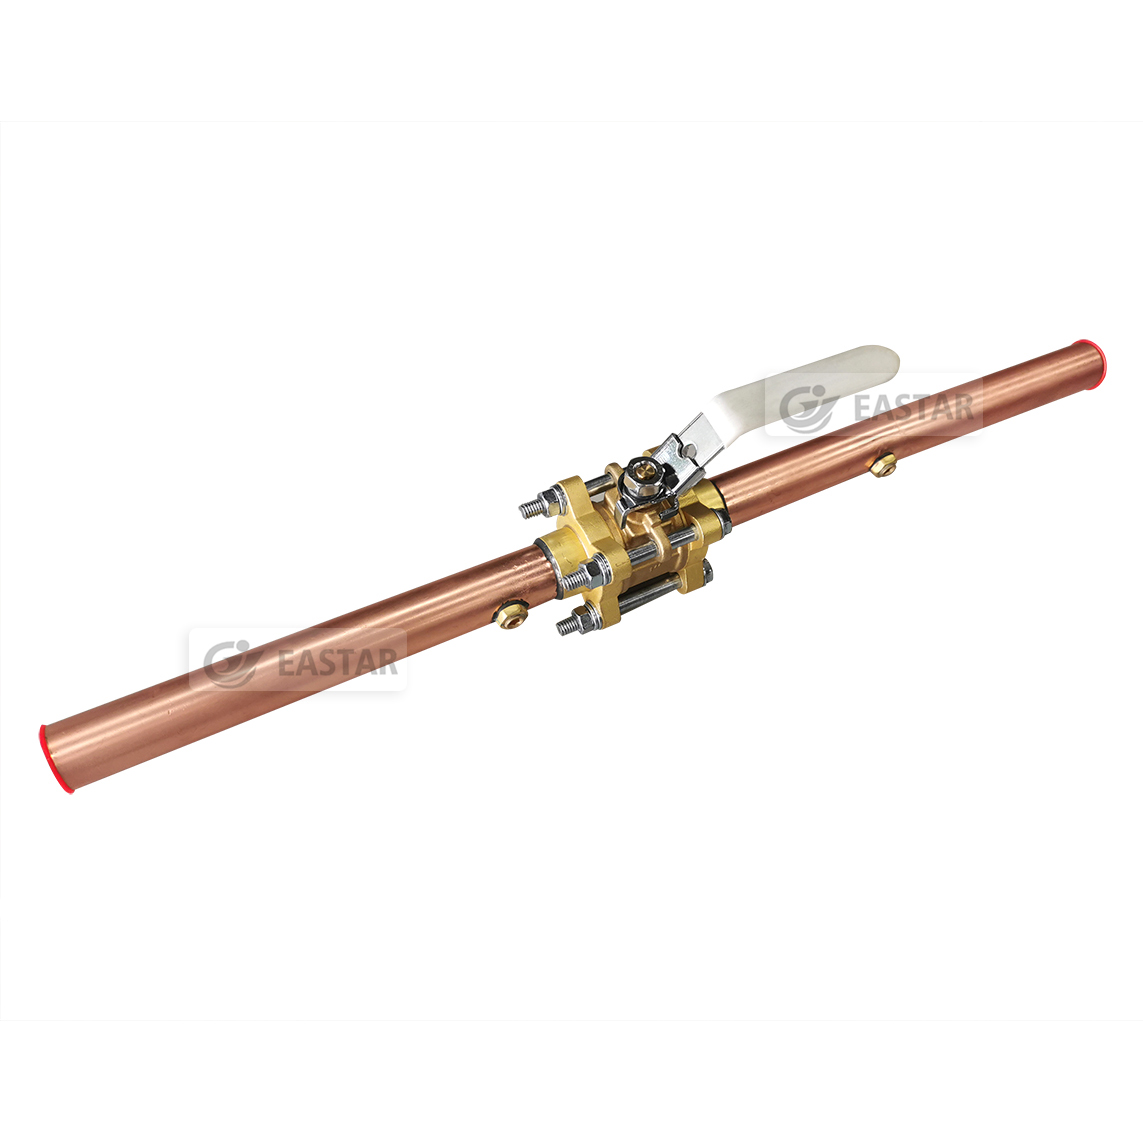 3-piece Brass Medical Gas Ball Valve with Extensions